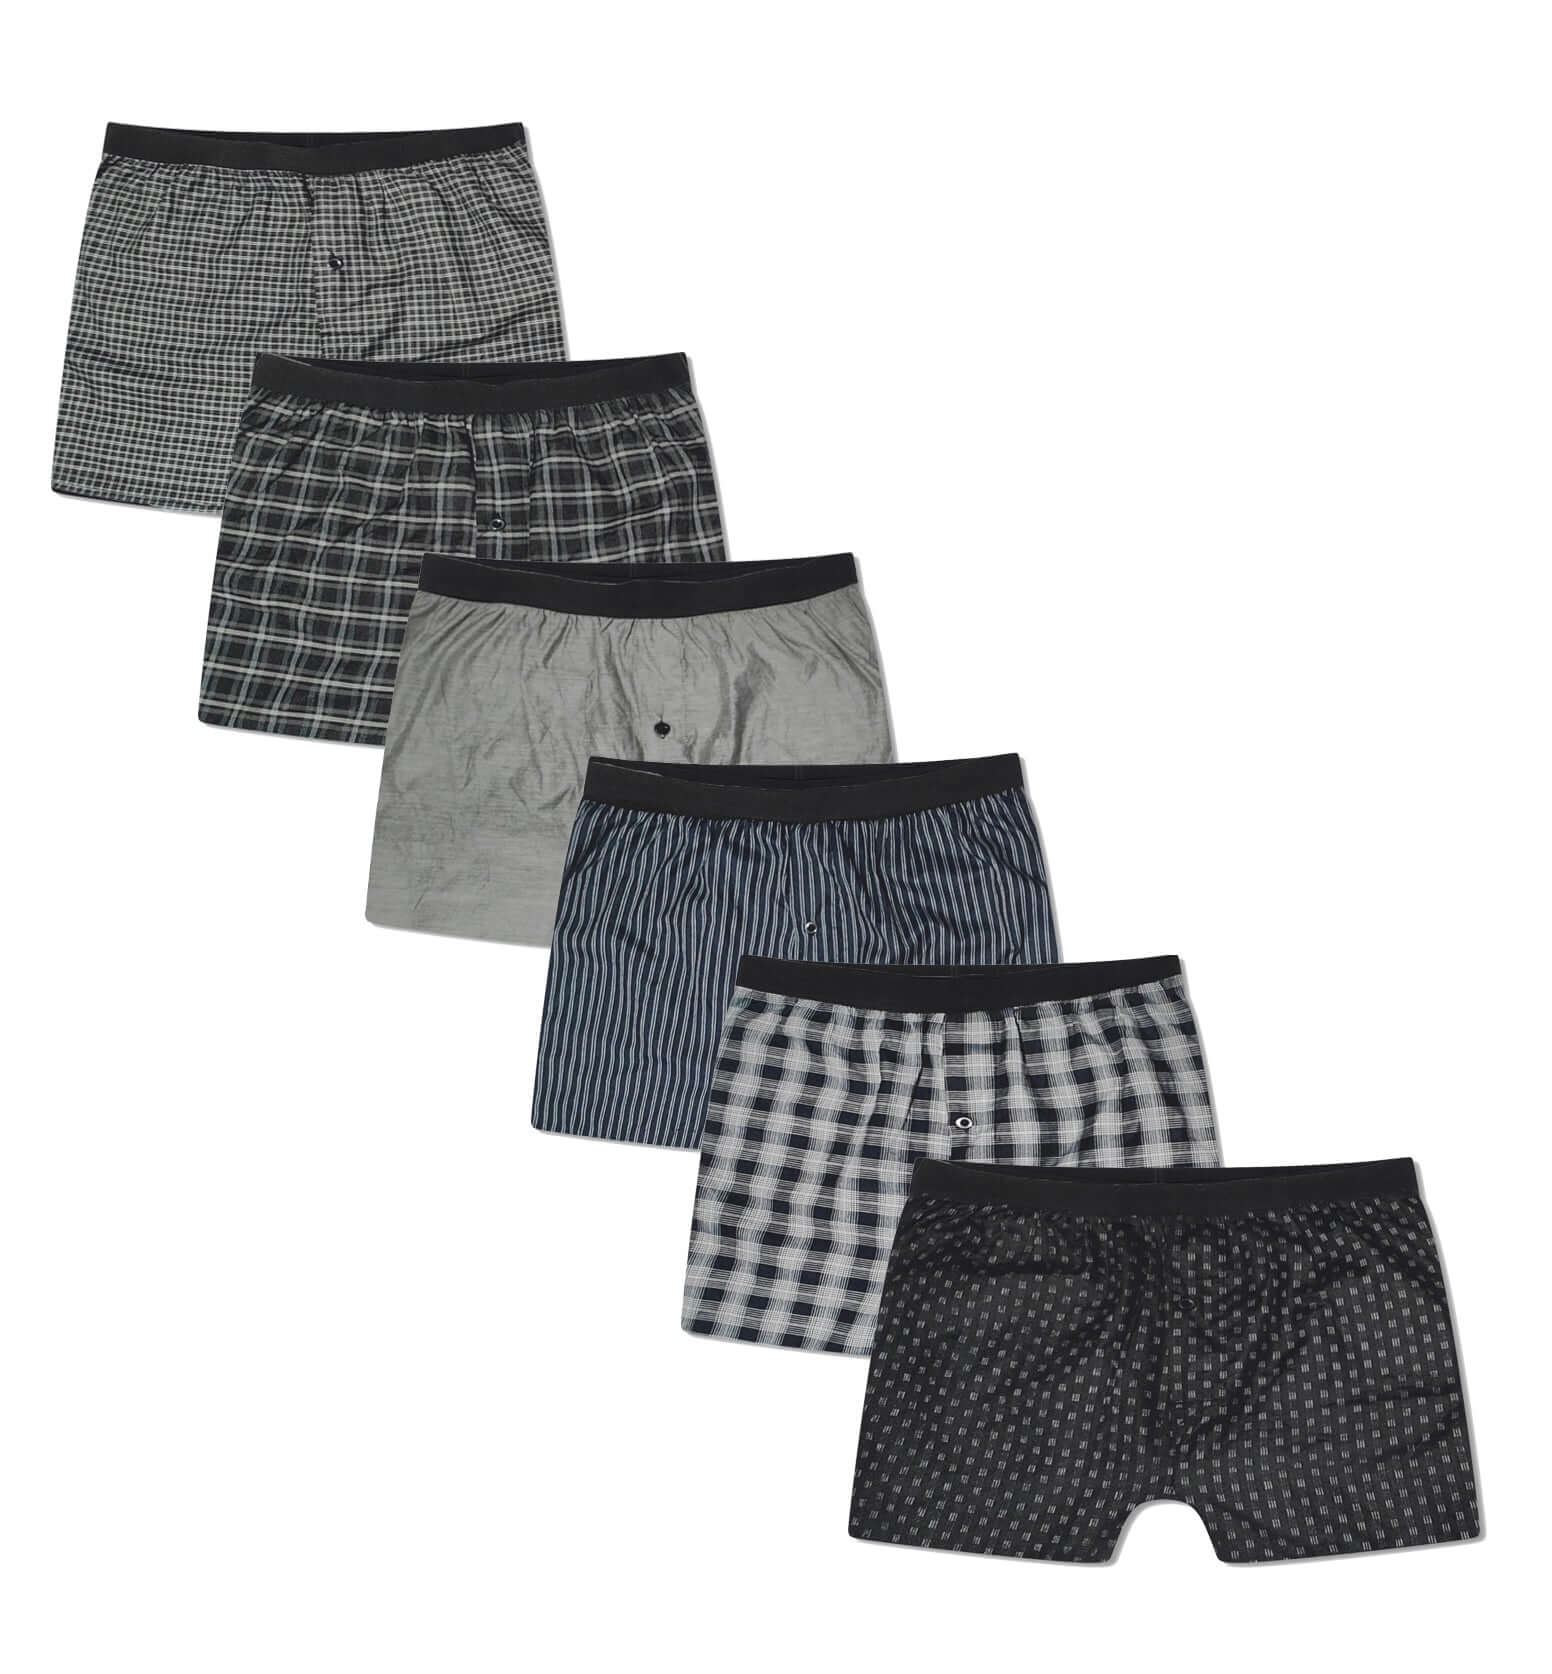 kleuring Molester barsten Pack Of 6 Men's Woven Boxers, Loose Fit Boxershorts, Comfort Waistband  Underwear (MB02). Buy Now For £8.00.